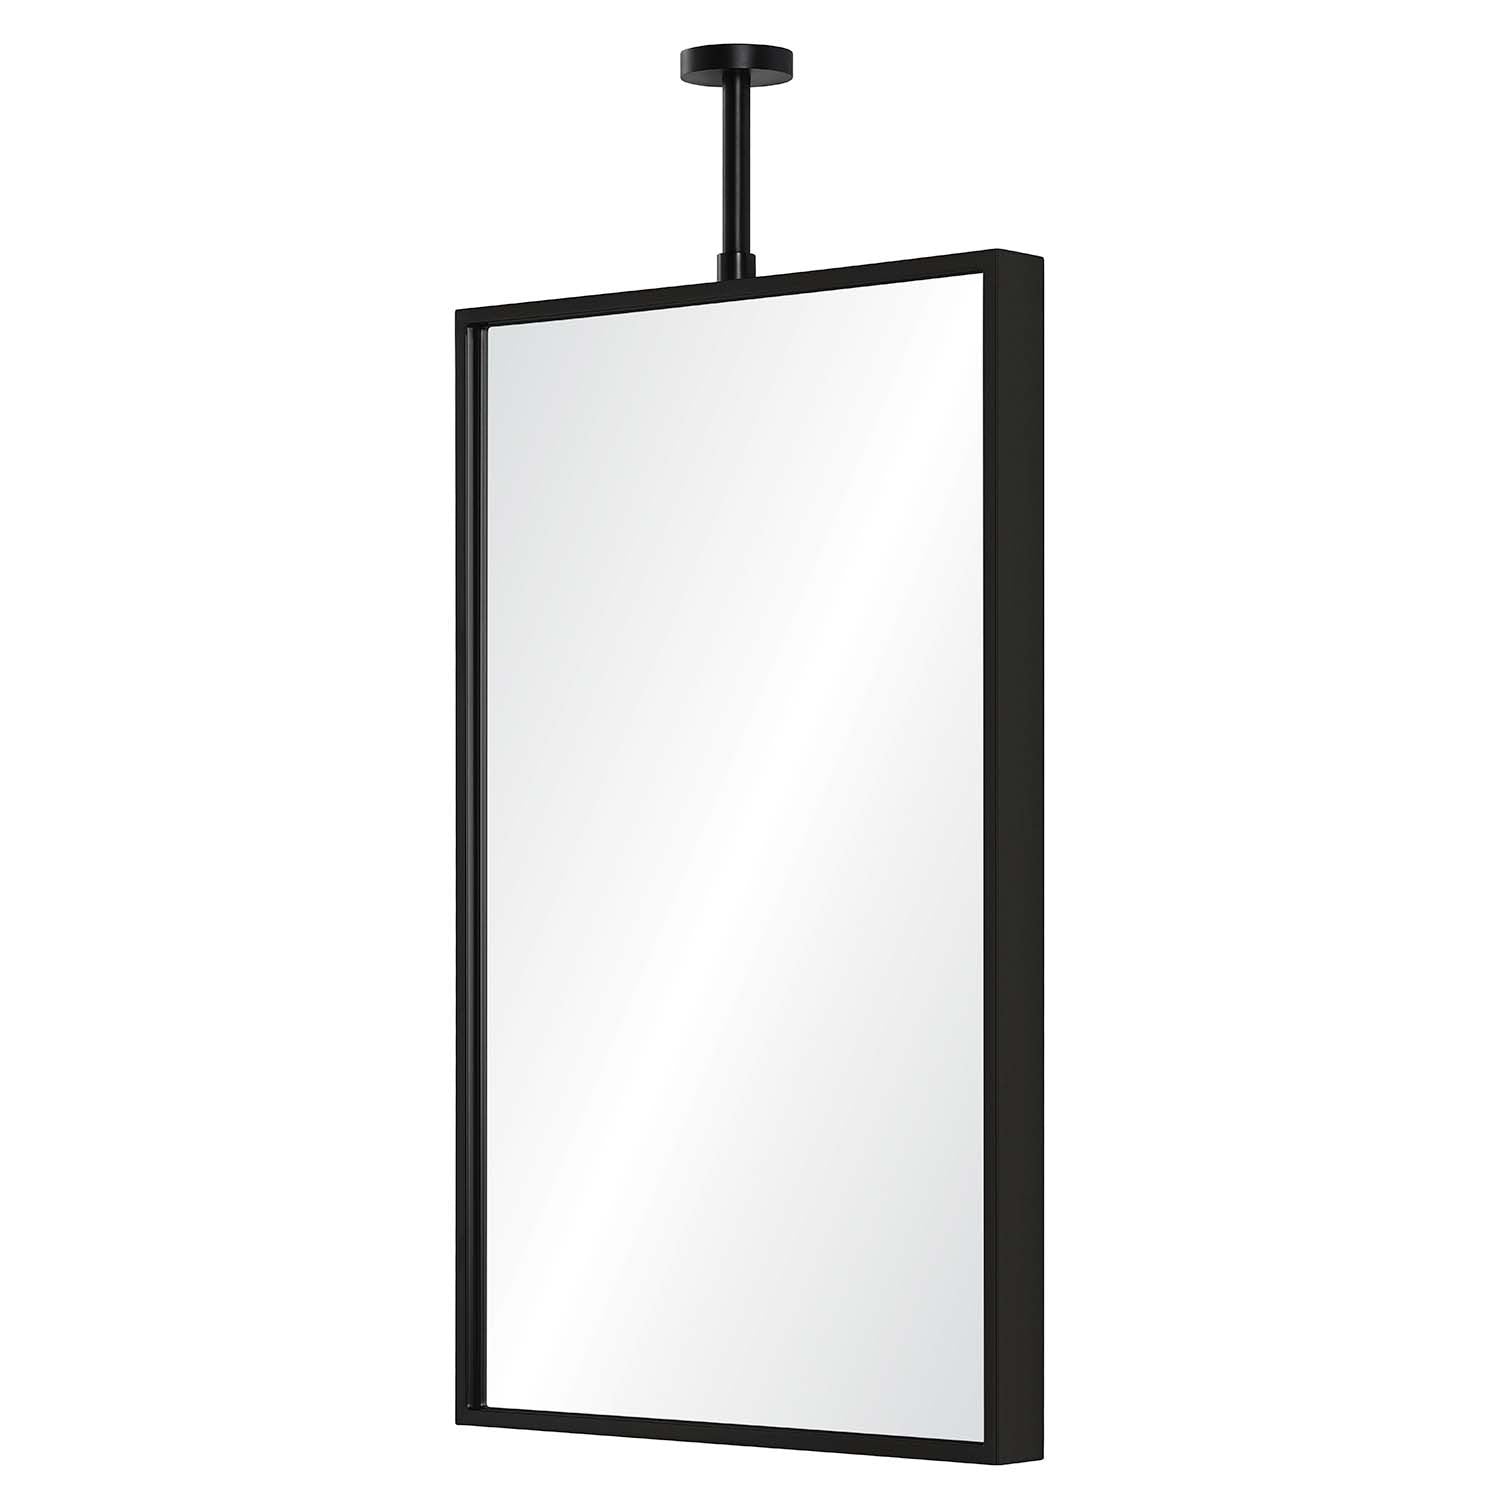 Fig Linens - Black Nickel Mirror with Adjustable Ceiling Mount by Mirror Home - Side